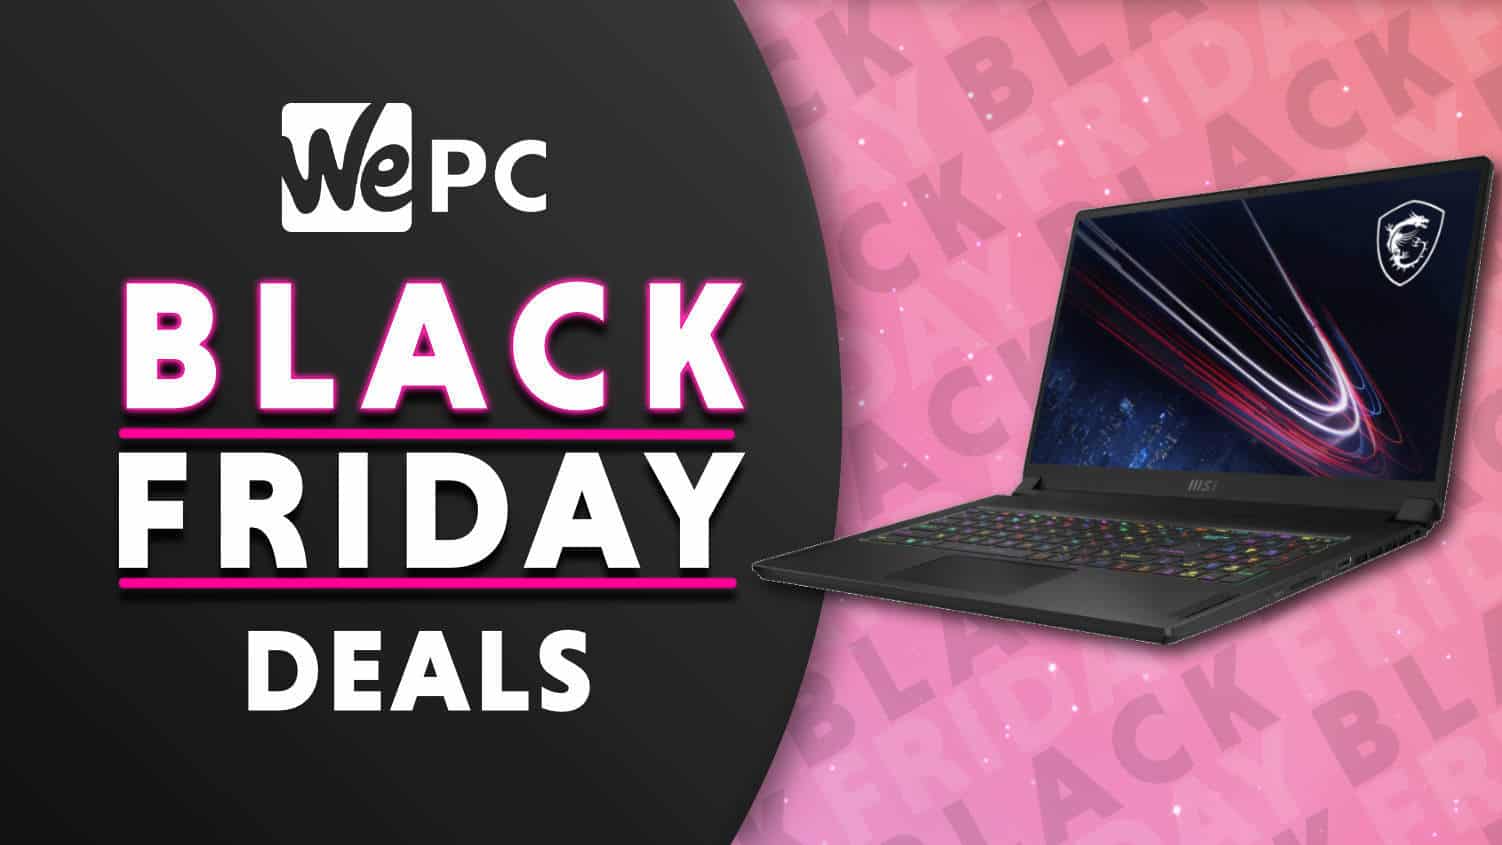 Save 9% on an MSI GS76 Gaming Laptop early Black Friday 2021